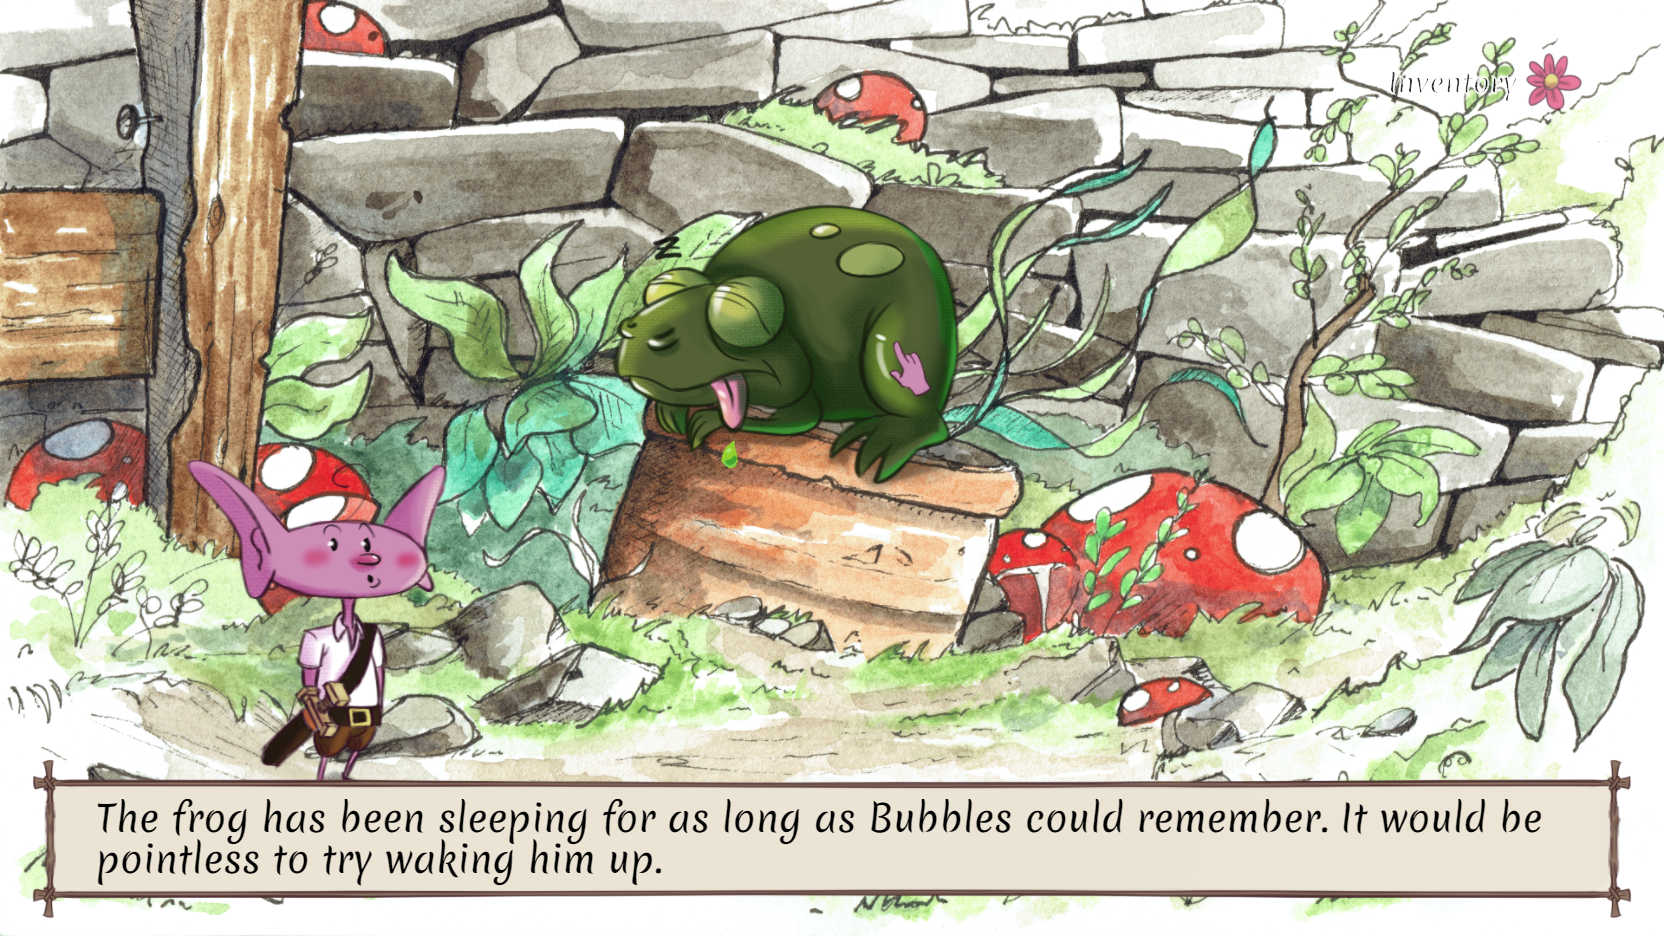 Screenshot showing Bubbles's encounter with the sleeping frog.